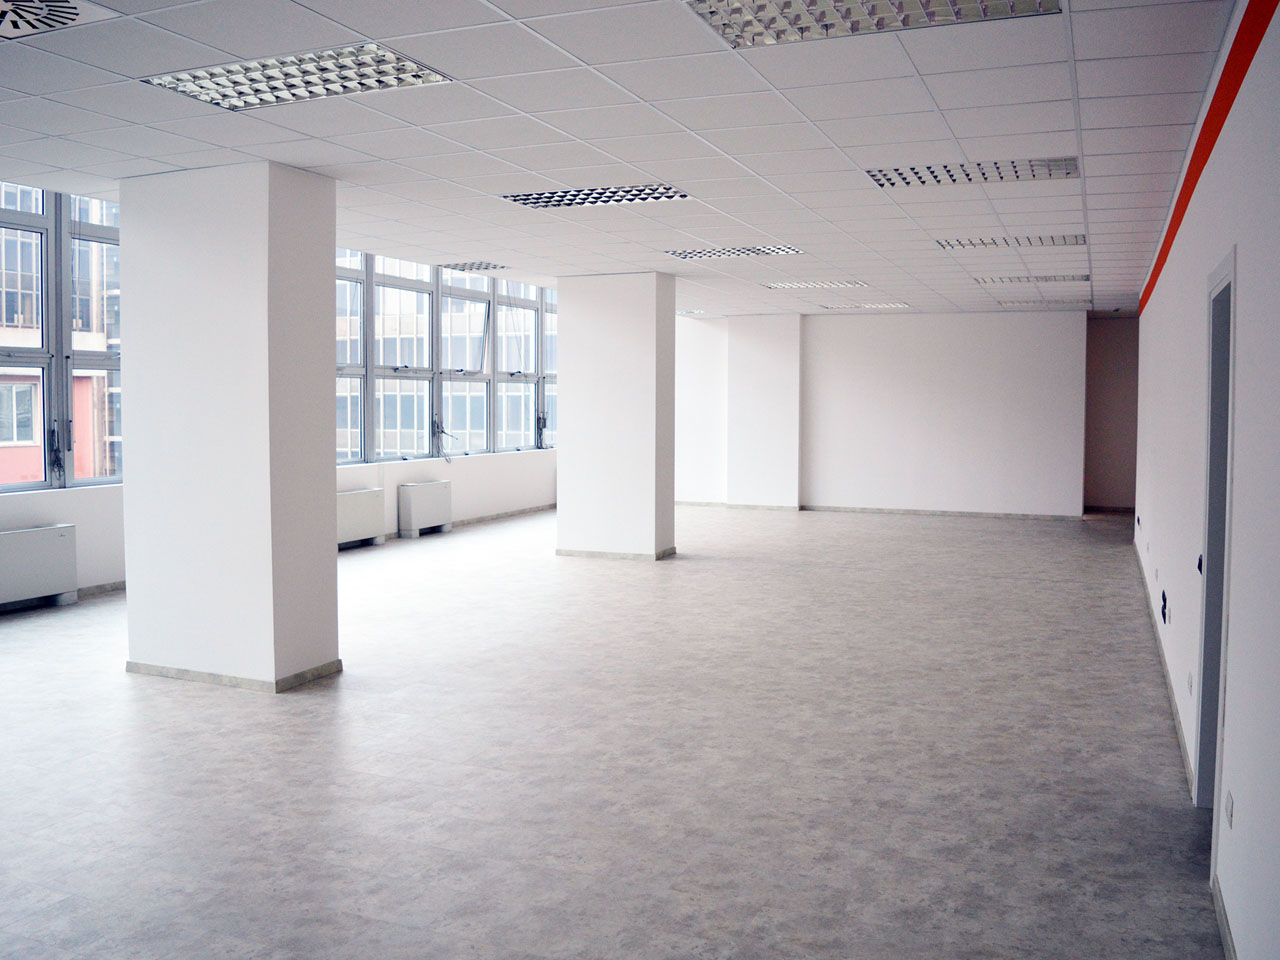 Open space - Office for rent in Milan 750 mq (8073 sqft)